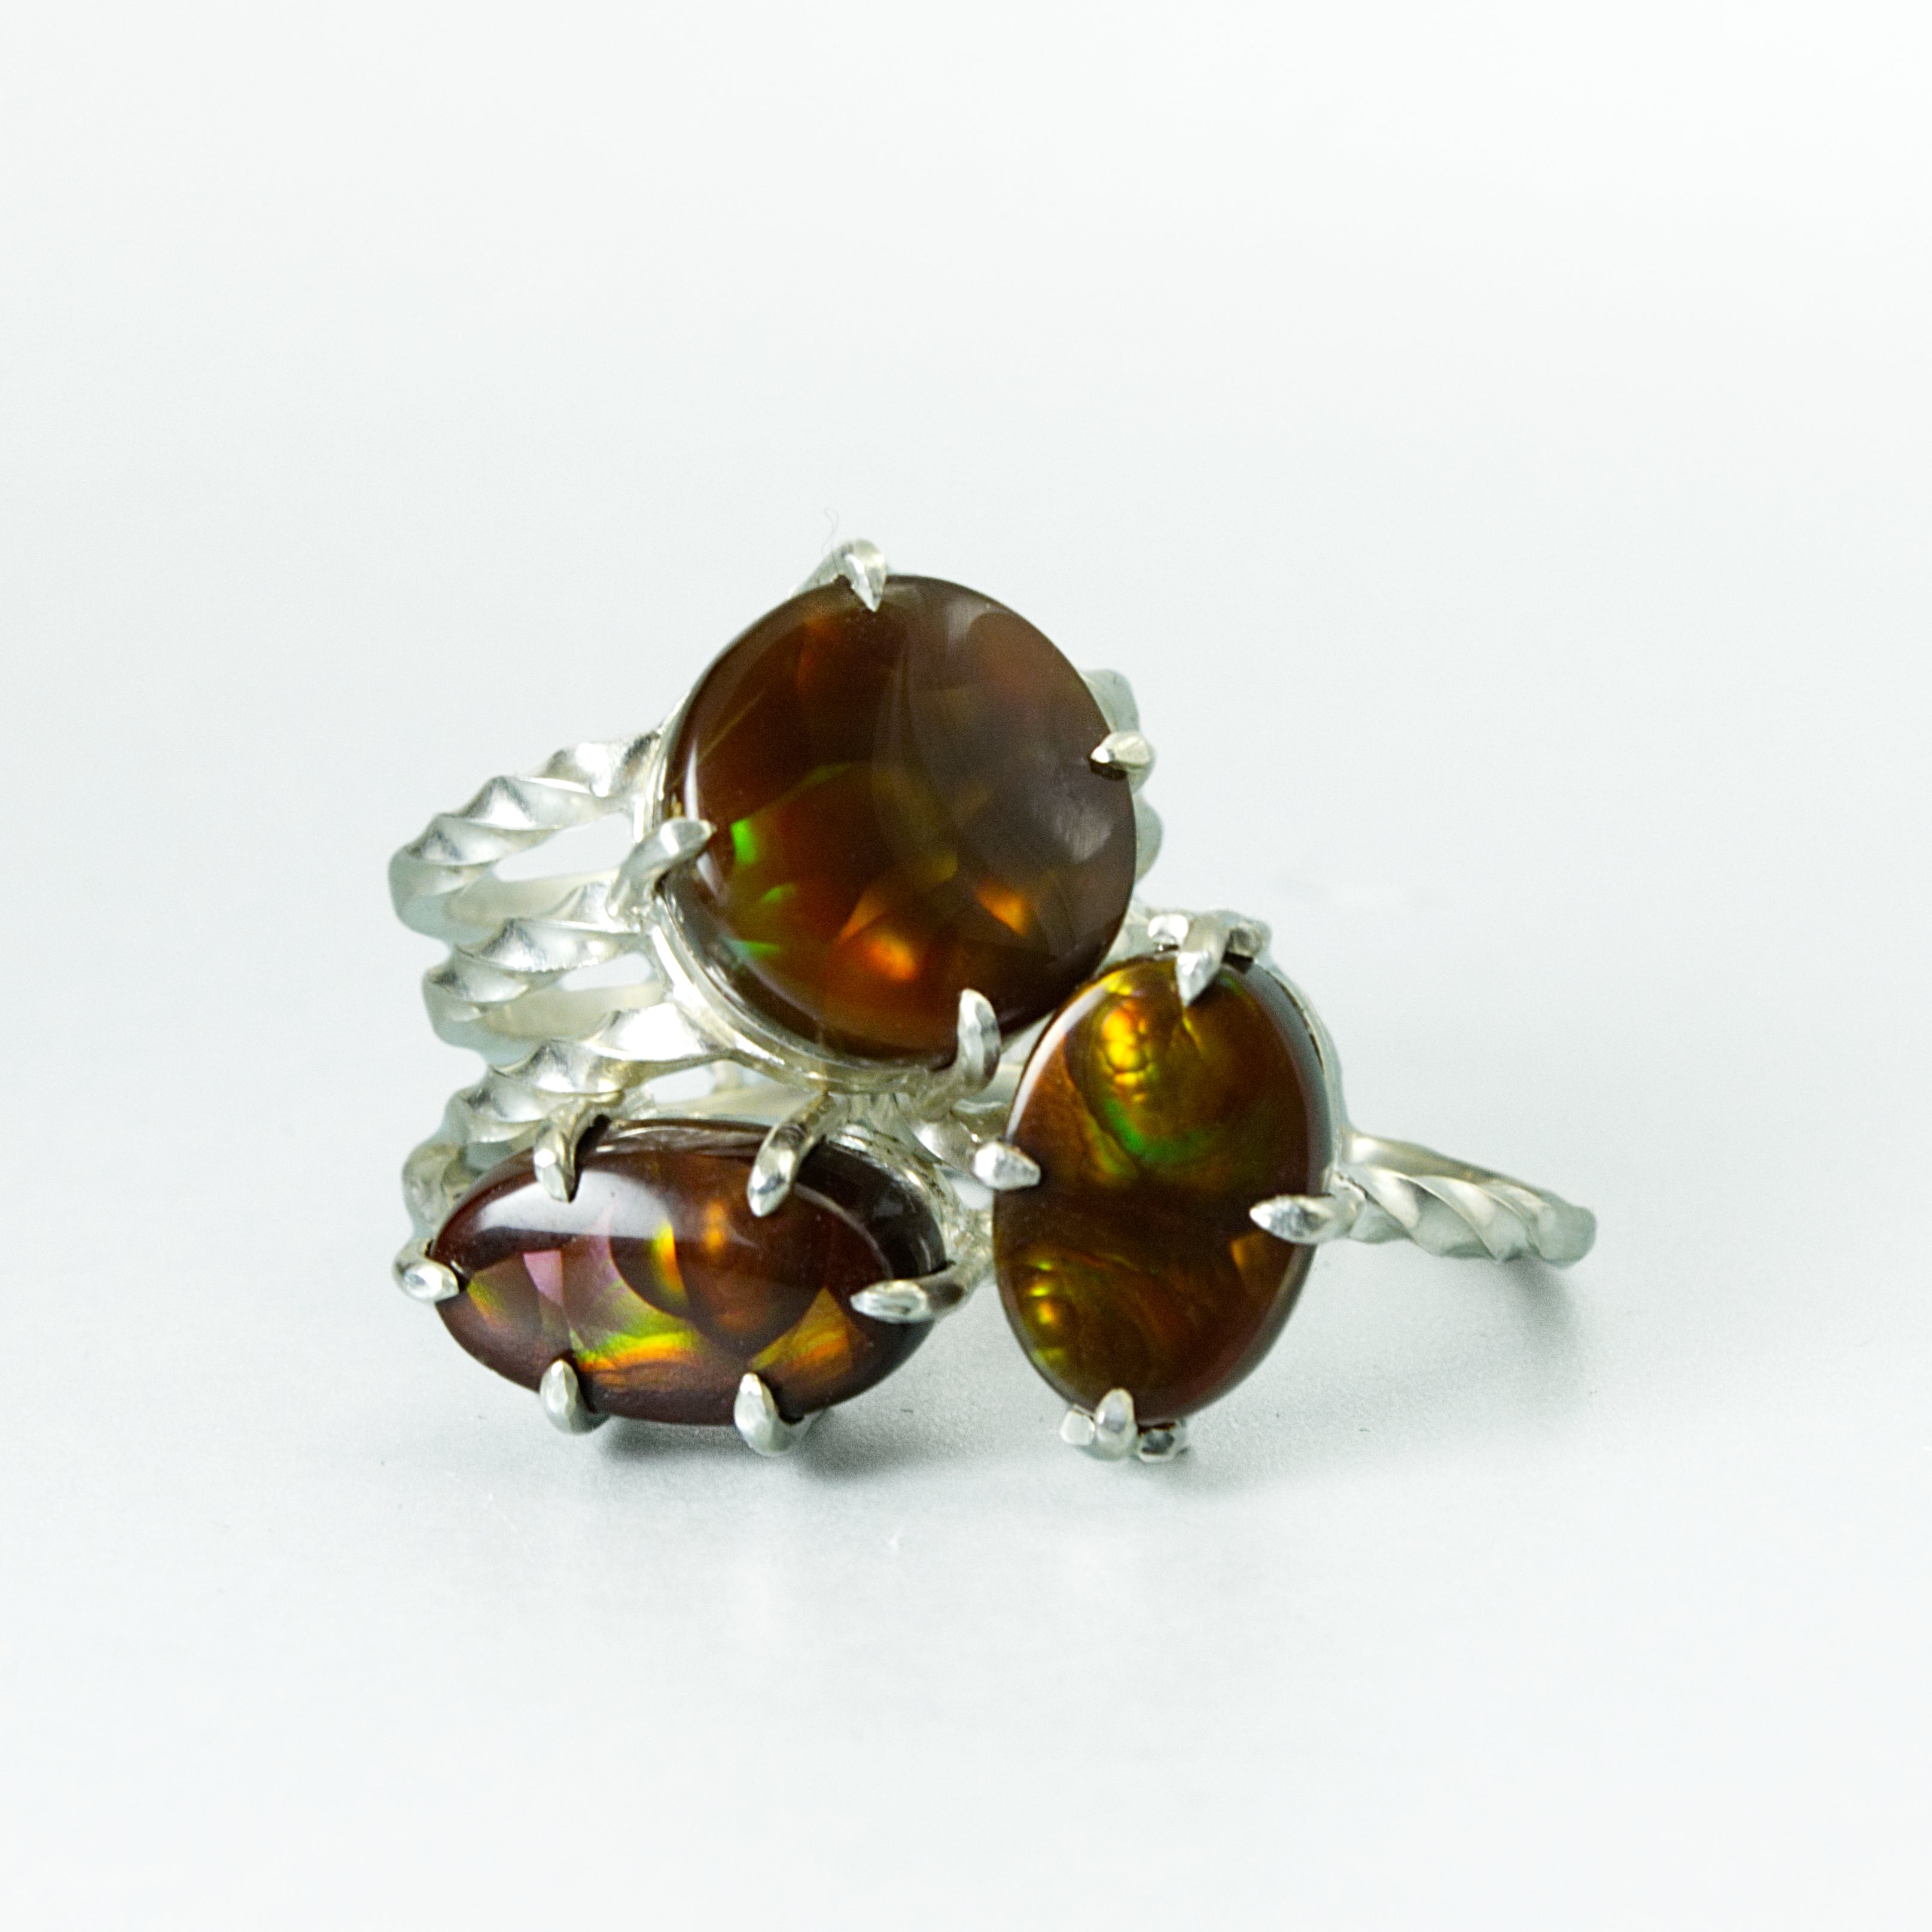 Fire Agate Twist Ring #1 - Size 6.5